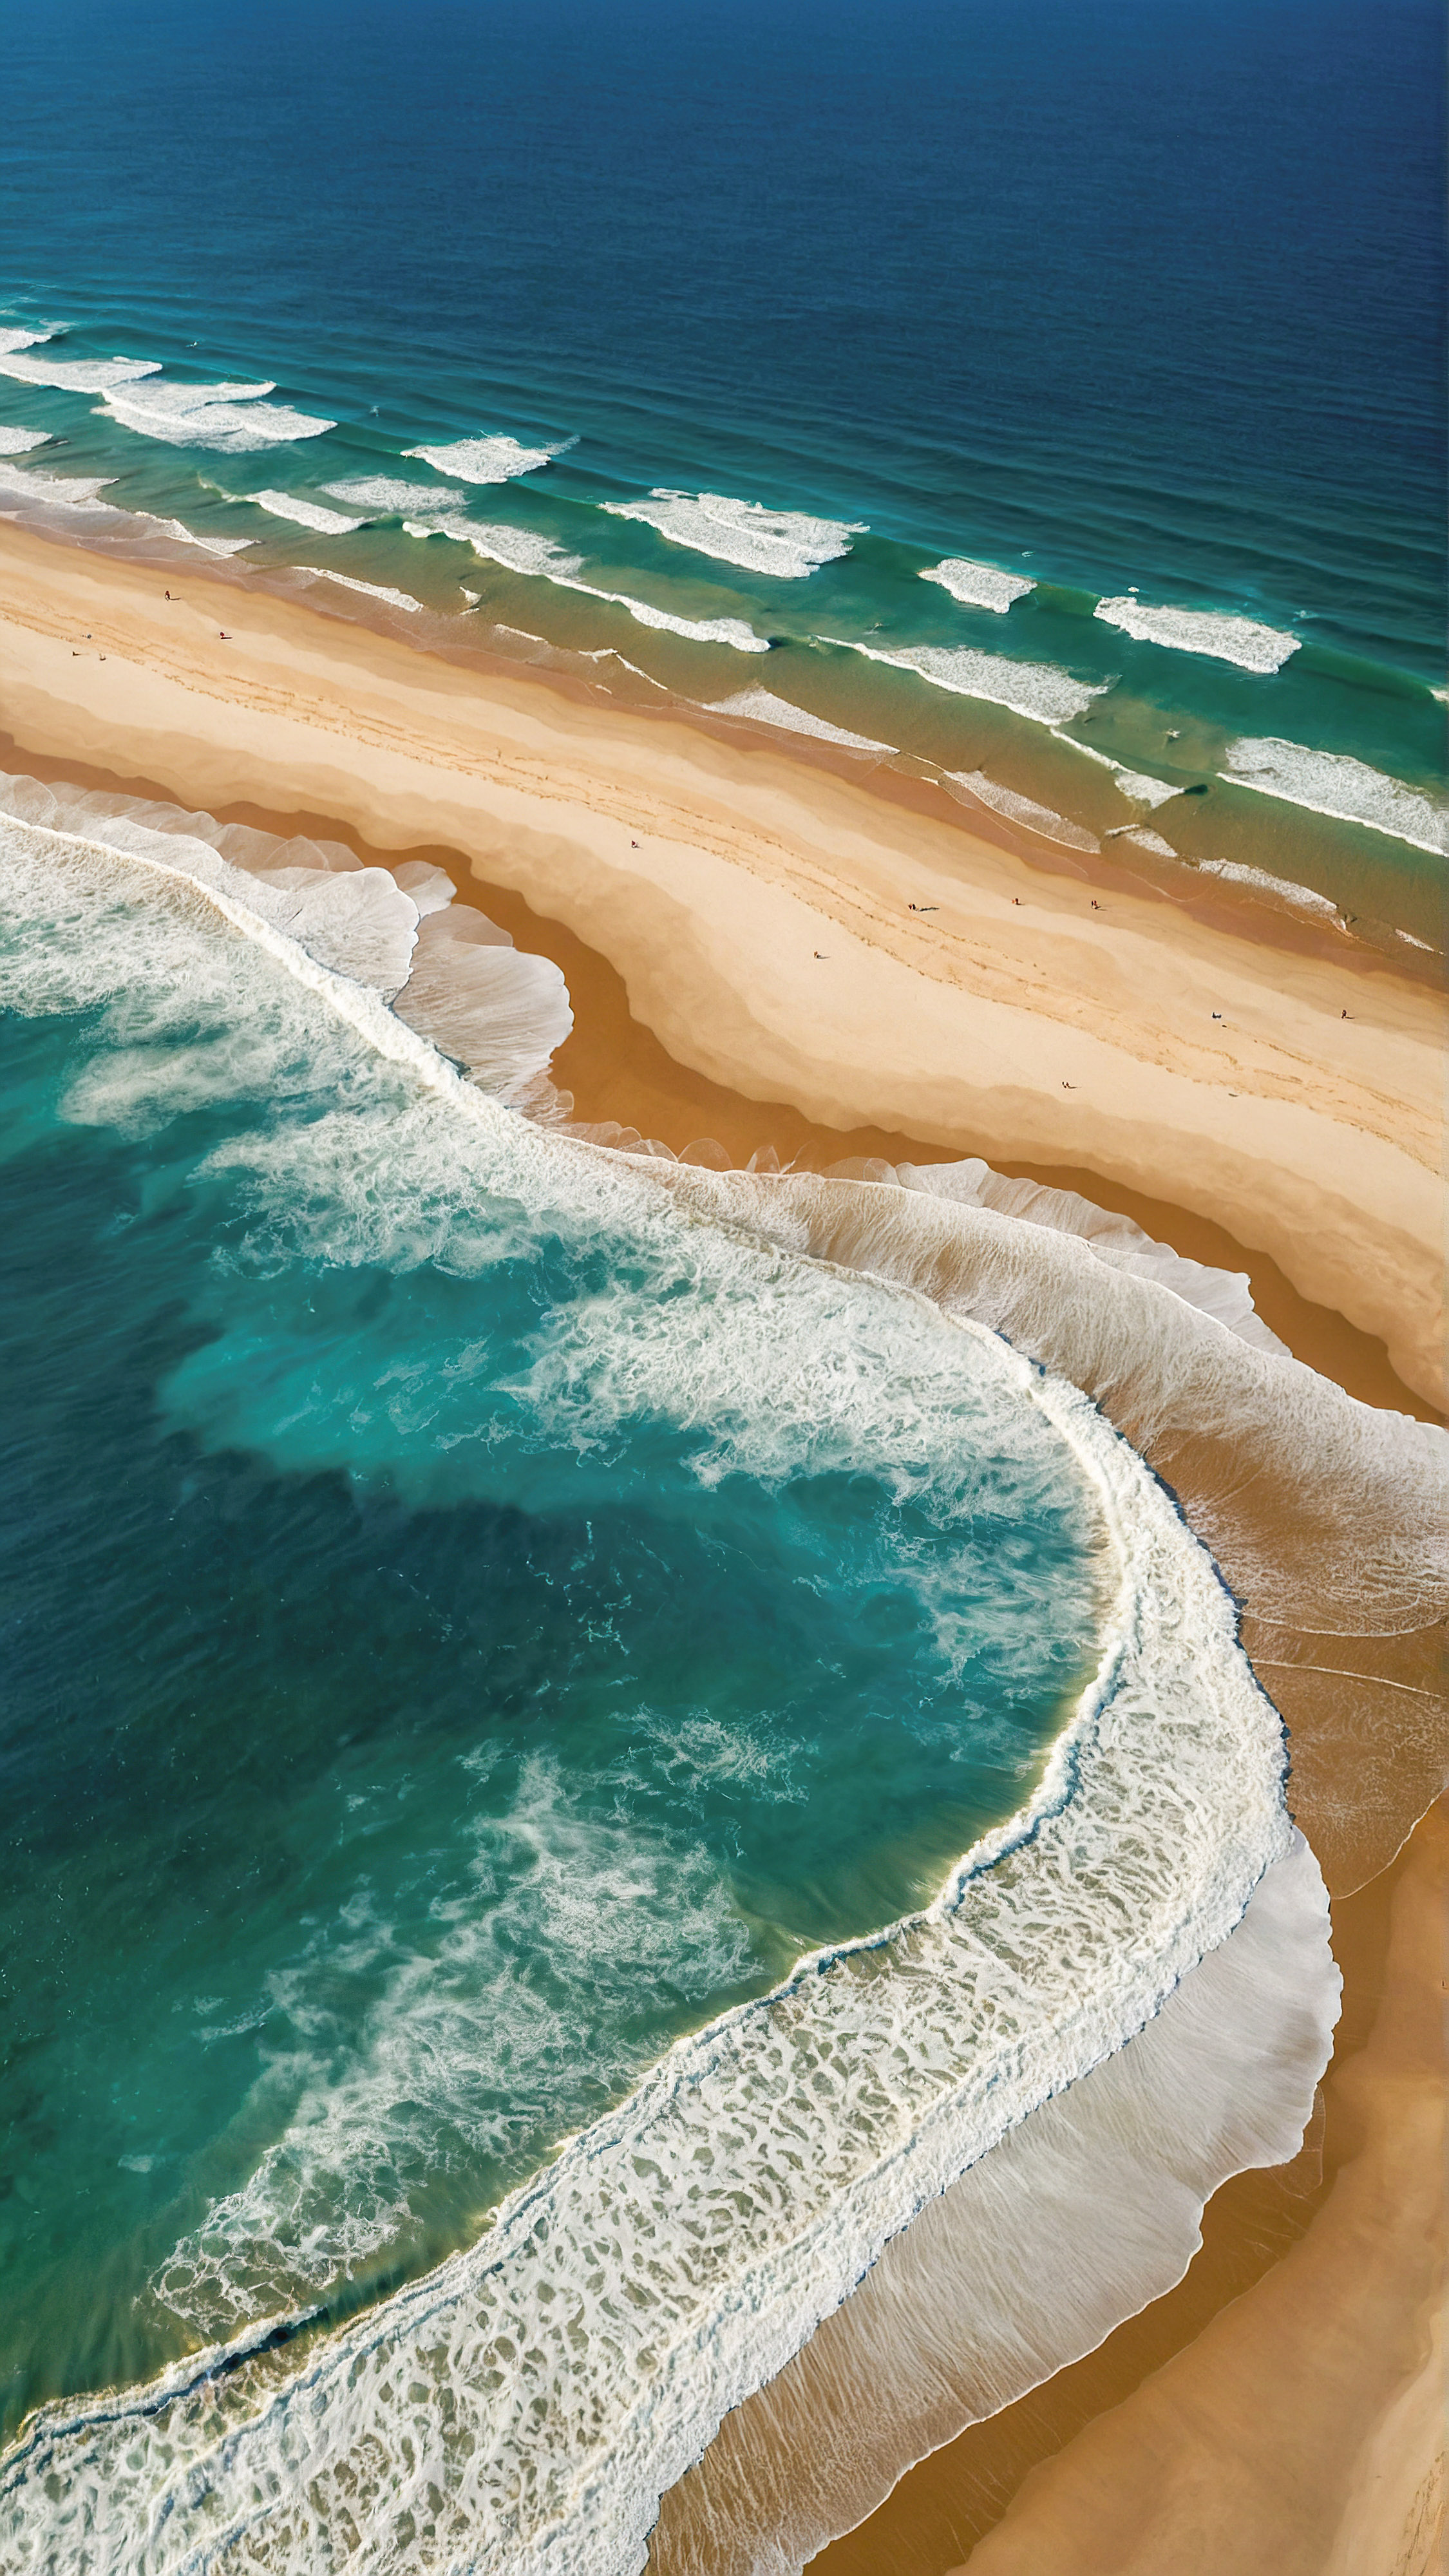 Experience the stunning aerial view of our 4K Ultra HD wallpaper for iPhone, showcasing a beach with a deep blue ocean, its lighter shades indicating the movement of white foamy waves meeting the light brown sandy shore.